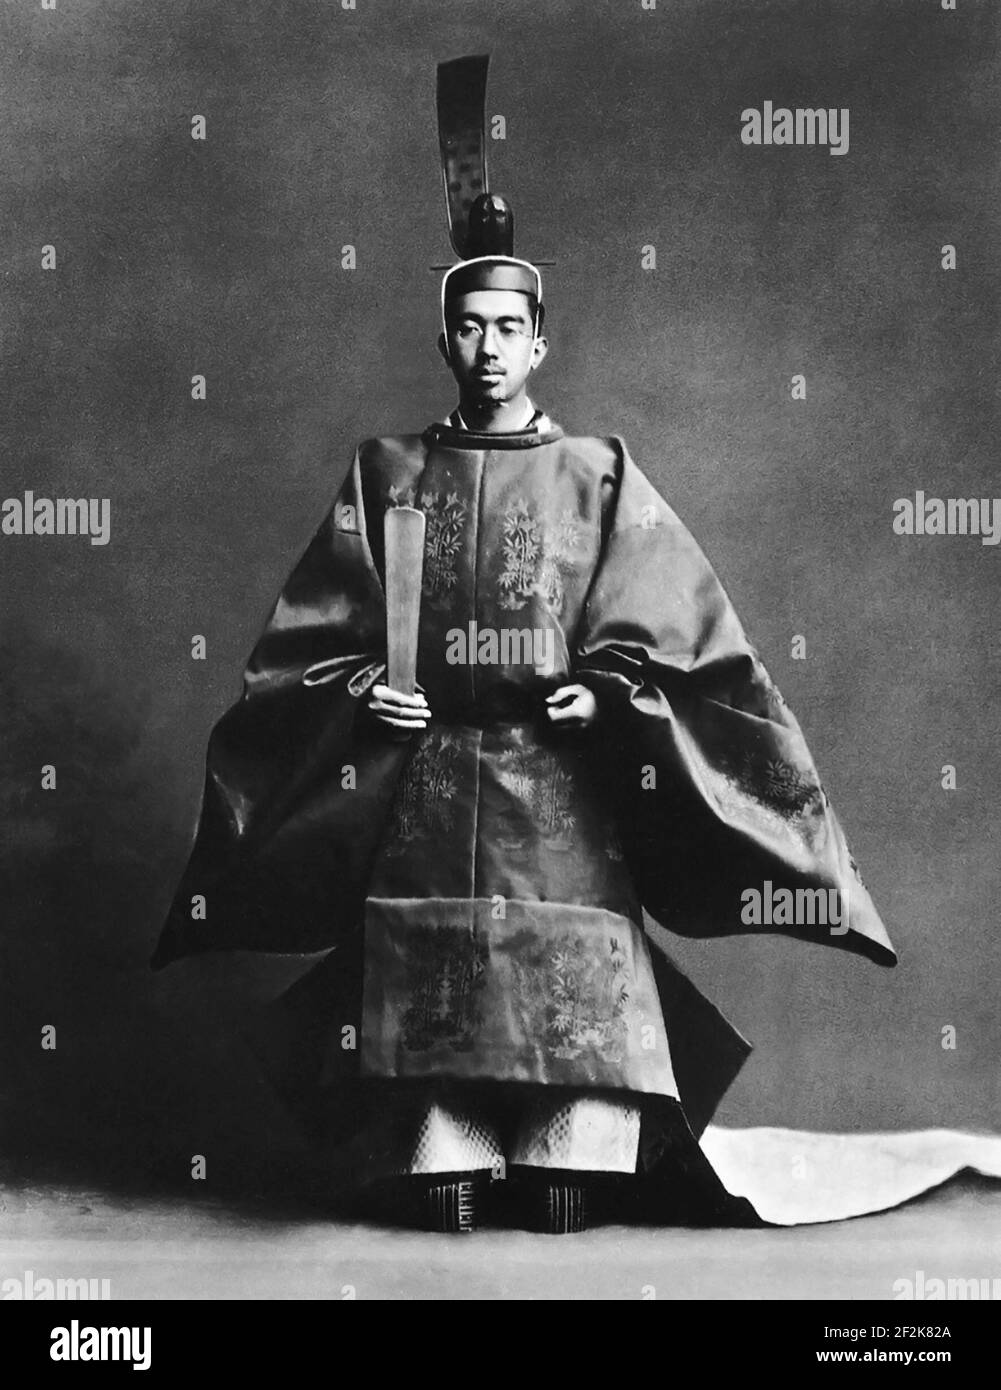 Hirohito. Portrait of the 124th emperor of Japan, Hirohito (1901-1989) at his enthronement ceremony in 1928 Stock Photo